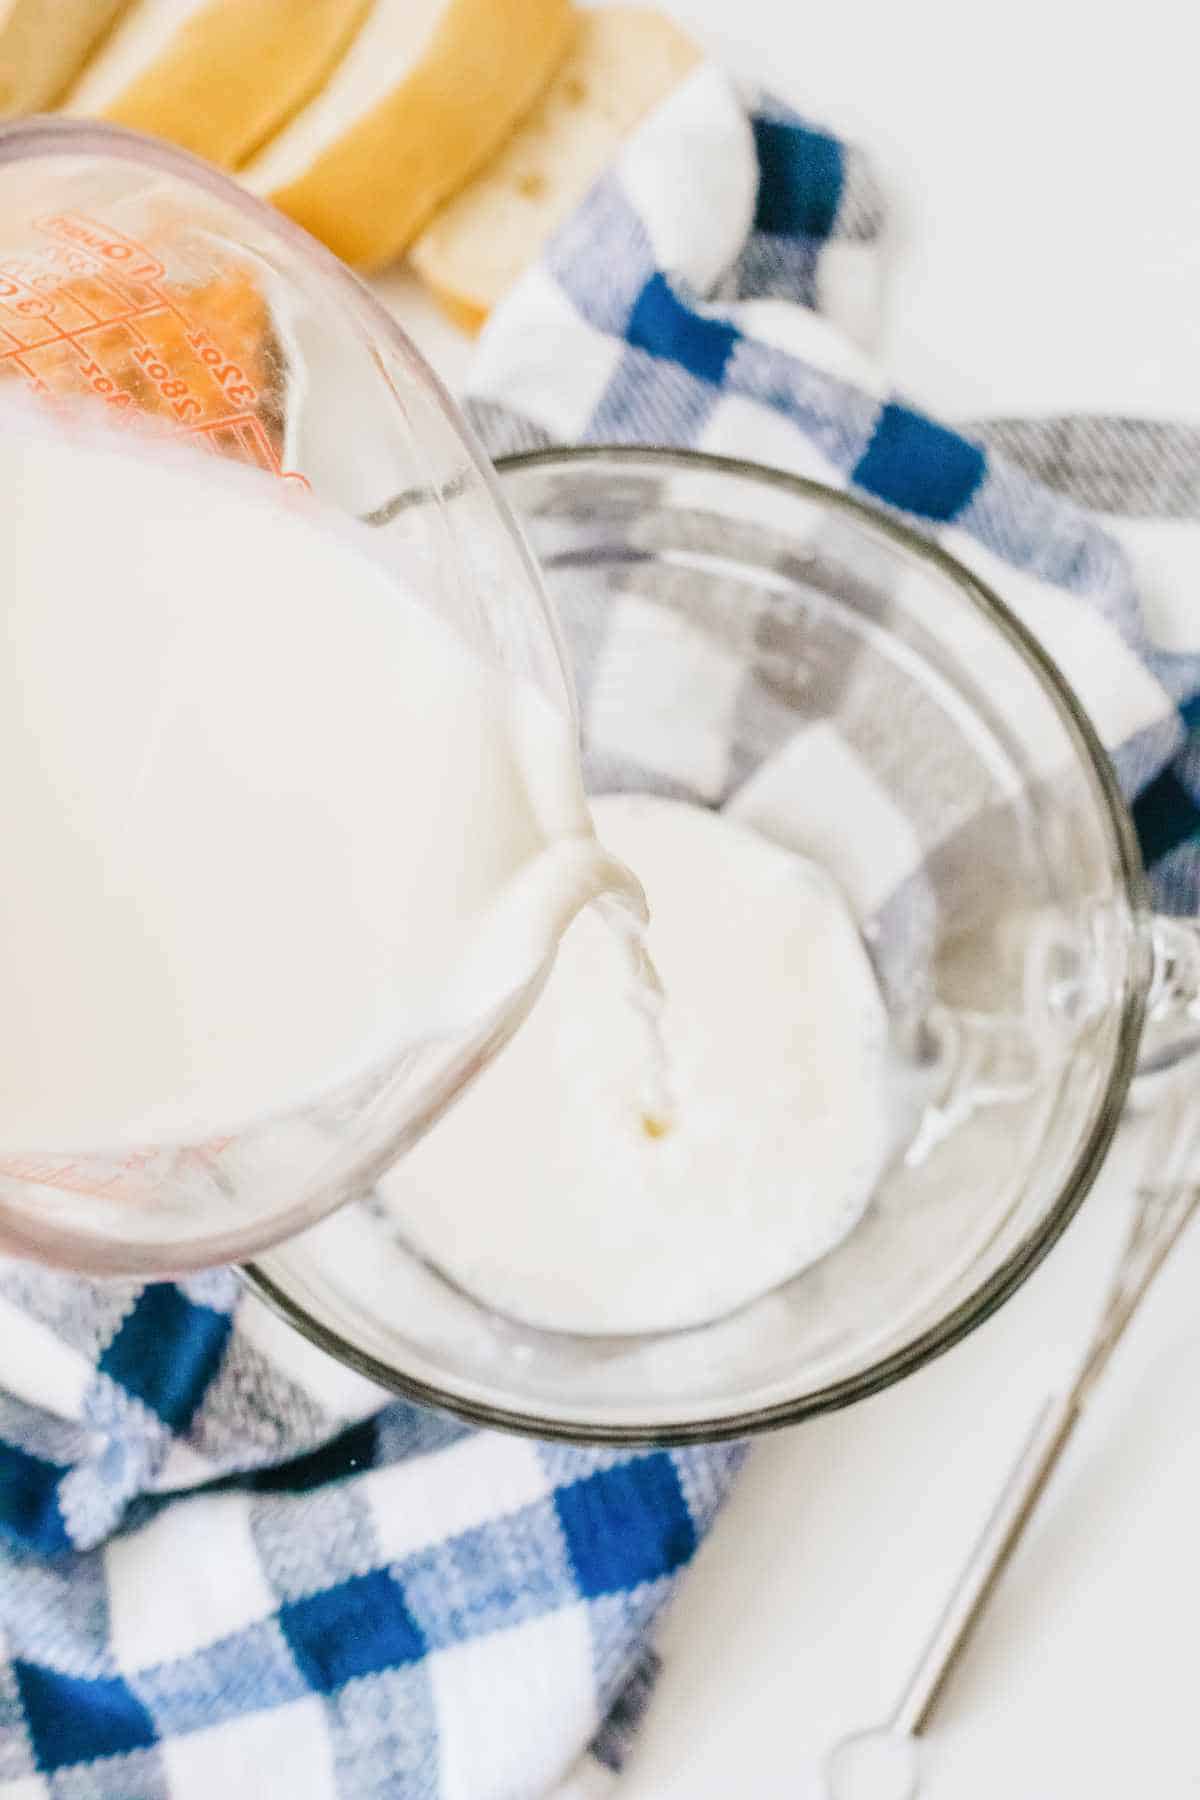 pouring milk or cream into a mixing bowl.